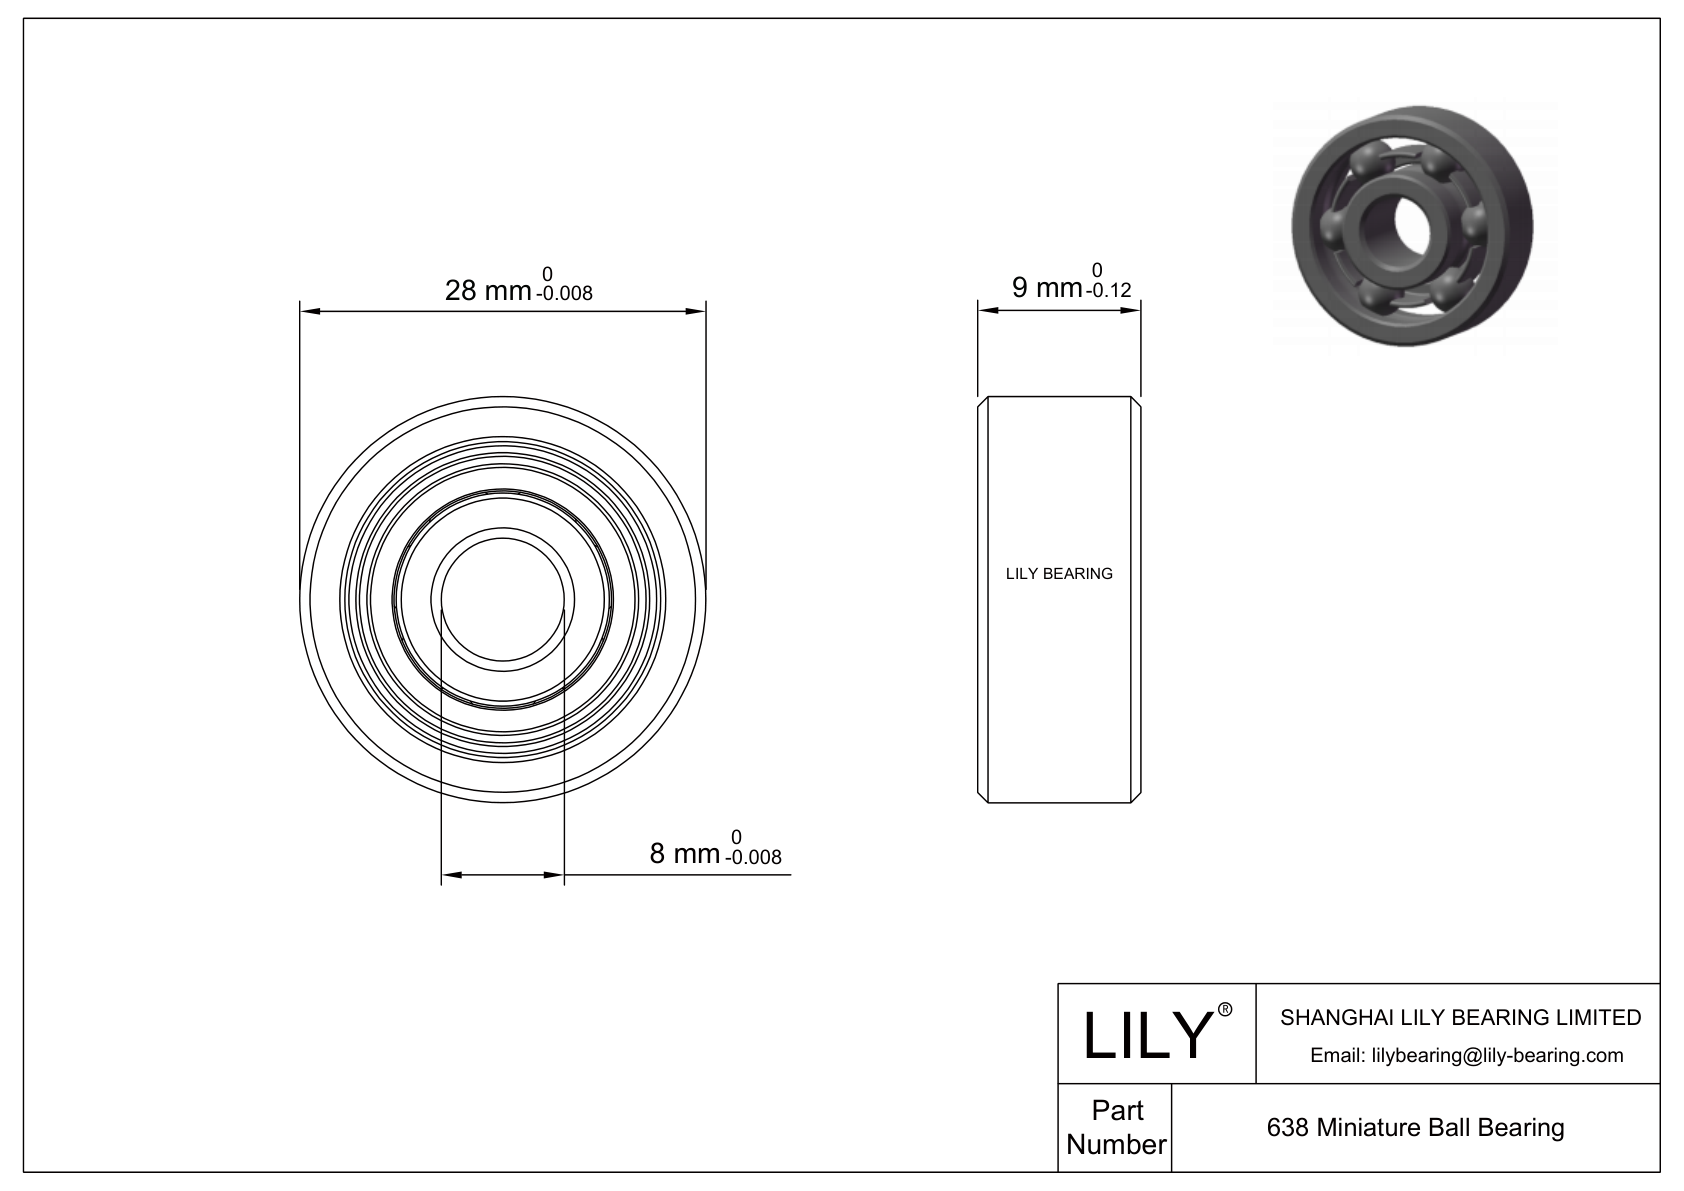 LILY-BS63845-20 POM Coated Bearing cad drawing